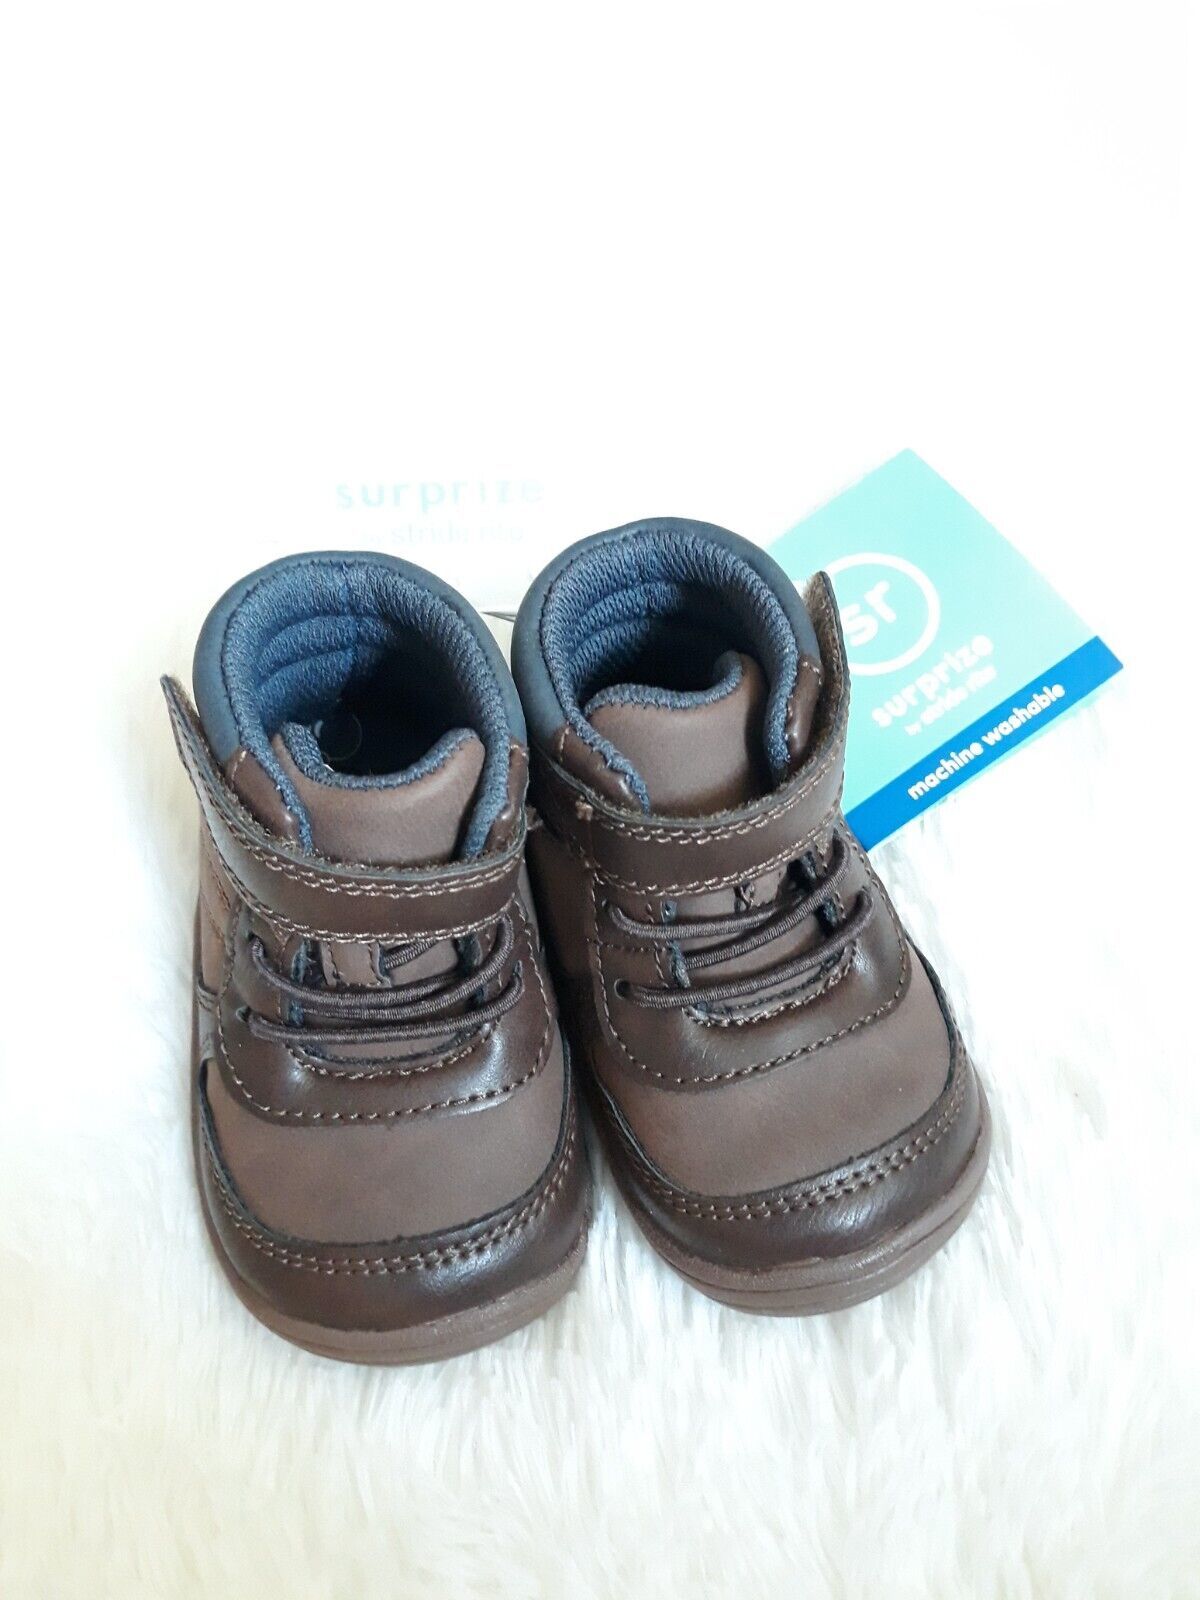 Surprize By Stride Rite Infant "No Tie" Boots Size 3 (Machine washable) - NEW!!! - $14.89